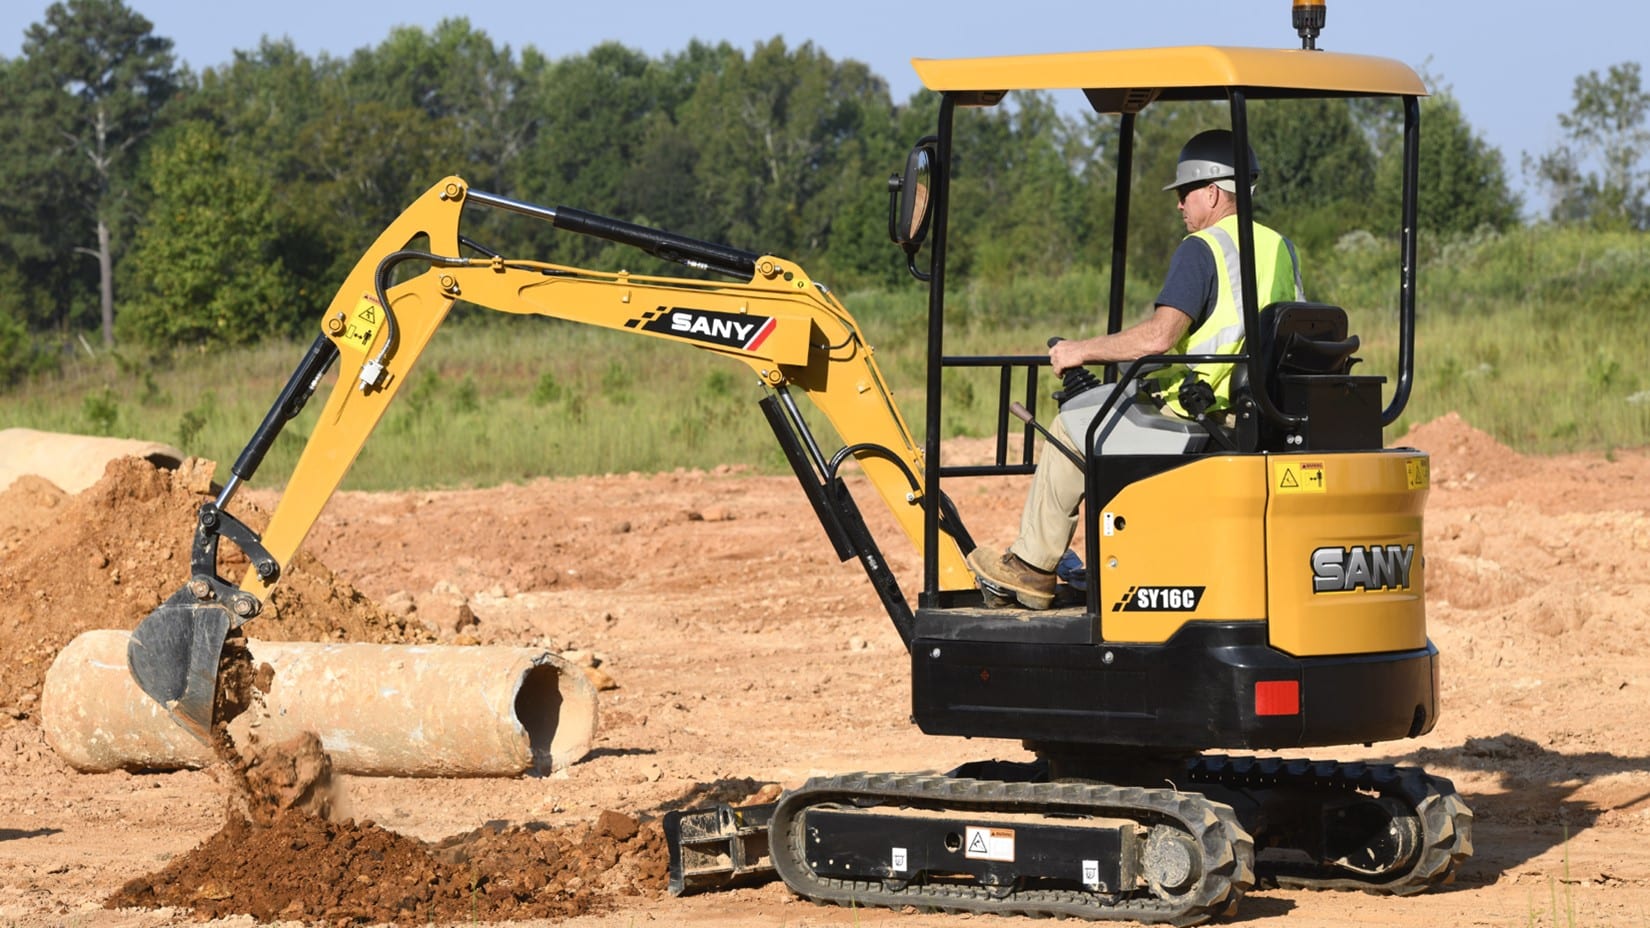 15 Reasons to Buy from an Established Construction Equipment Dealer in KC